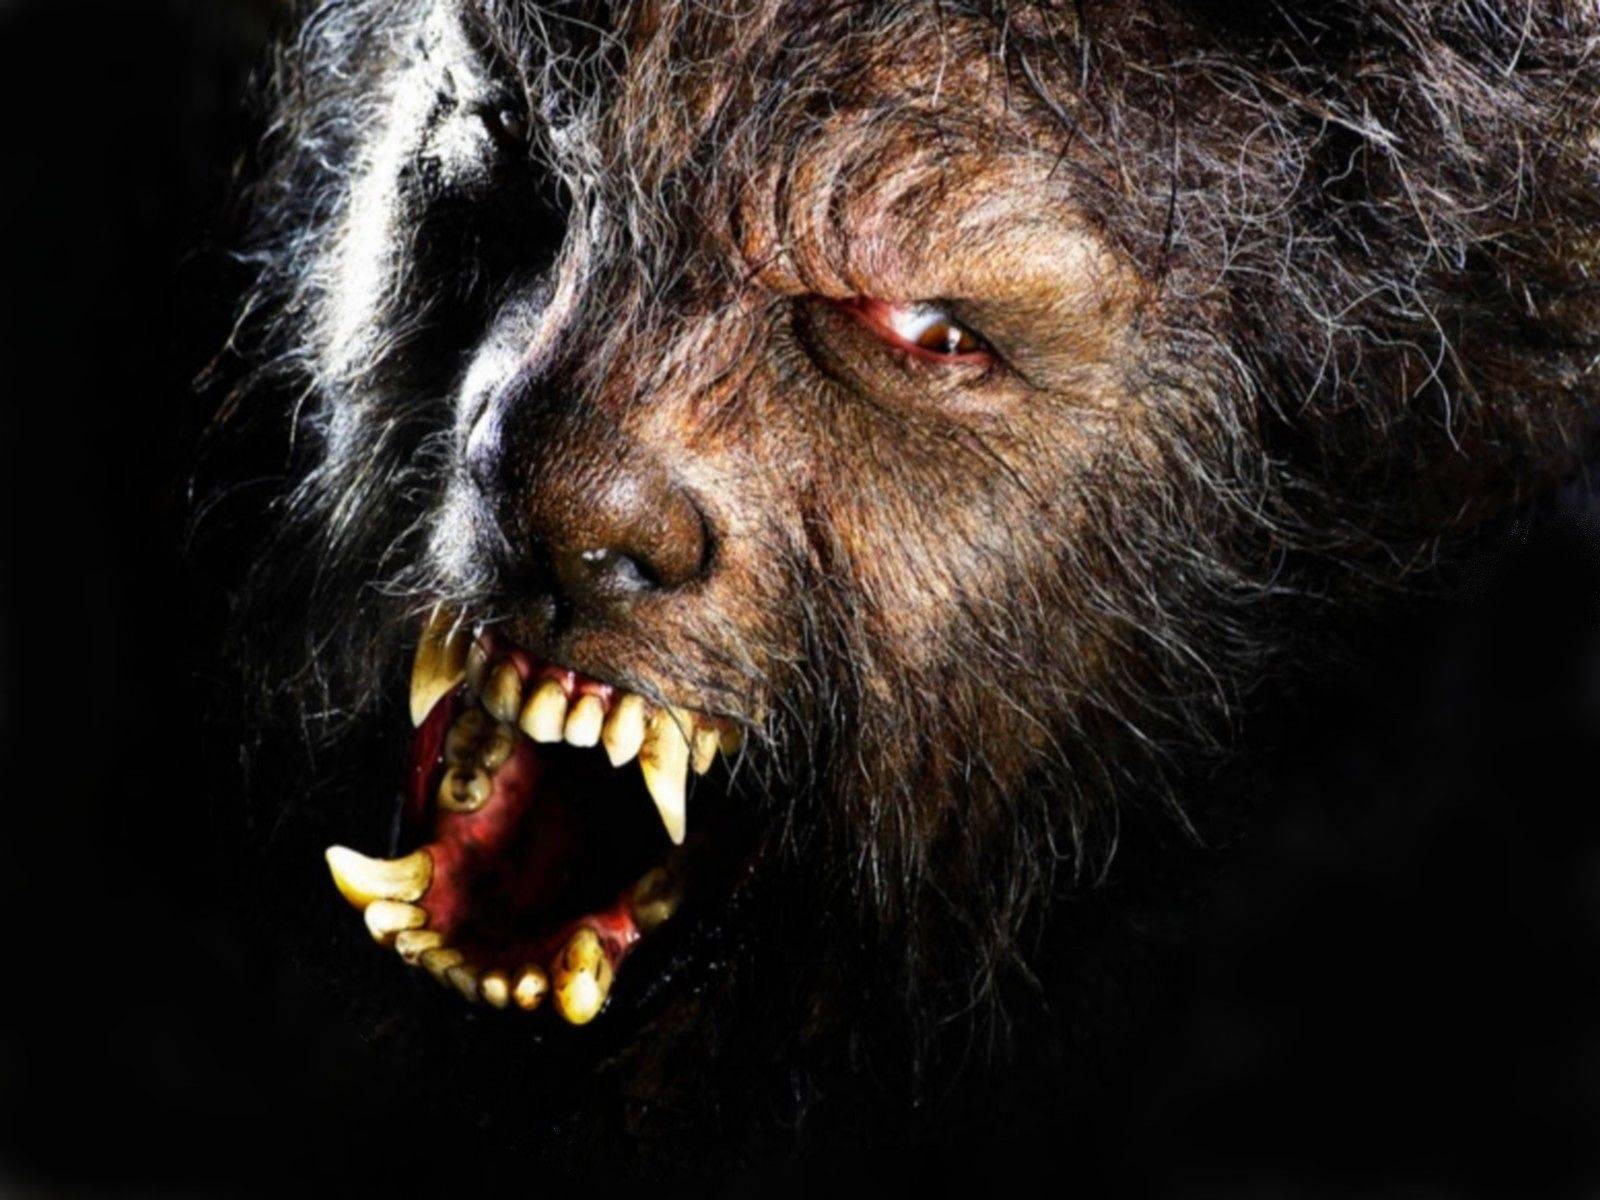 7-bloodcurdling-werewolf-tales-that-will-keep-you-up-at-night-390676.jpg